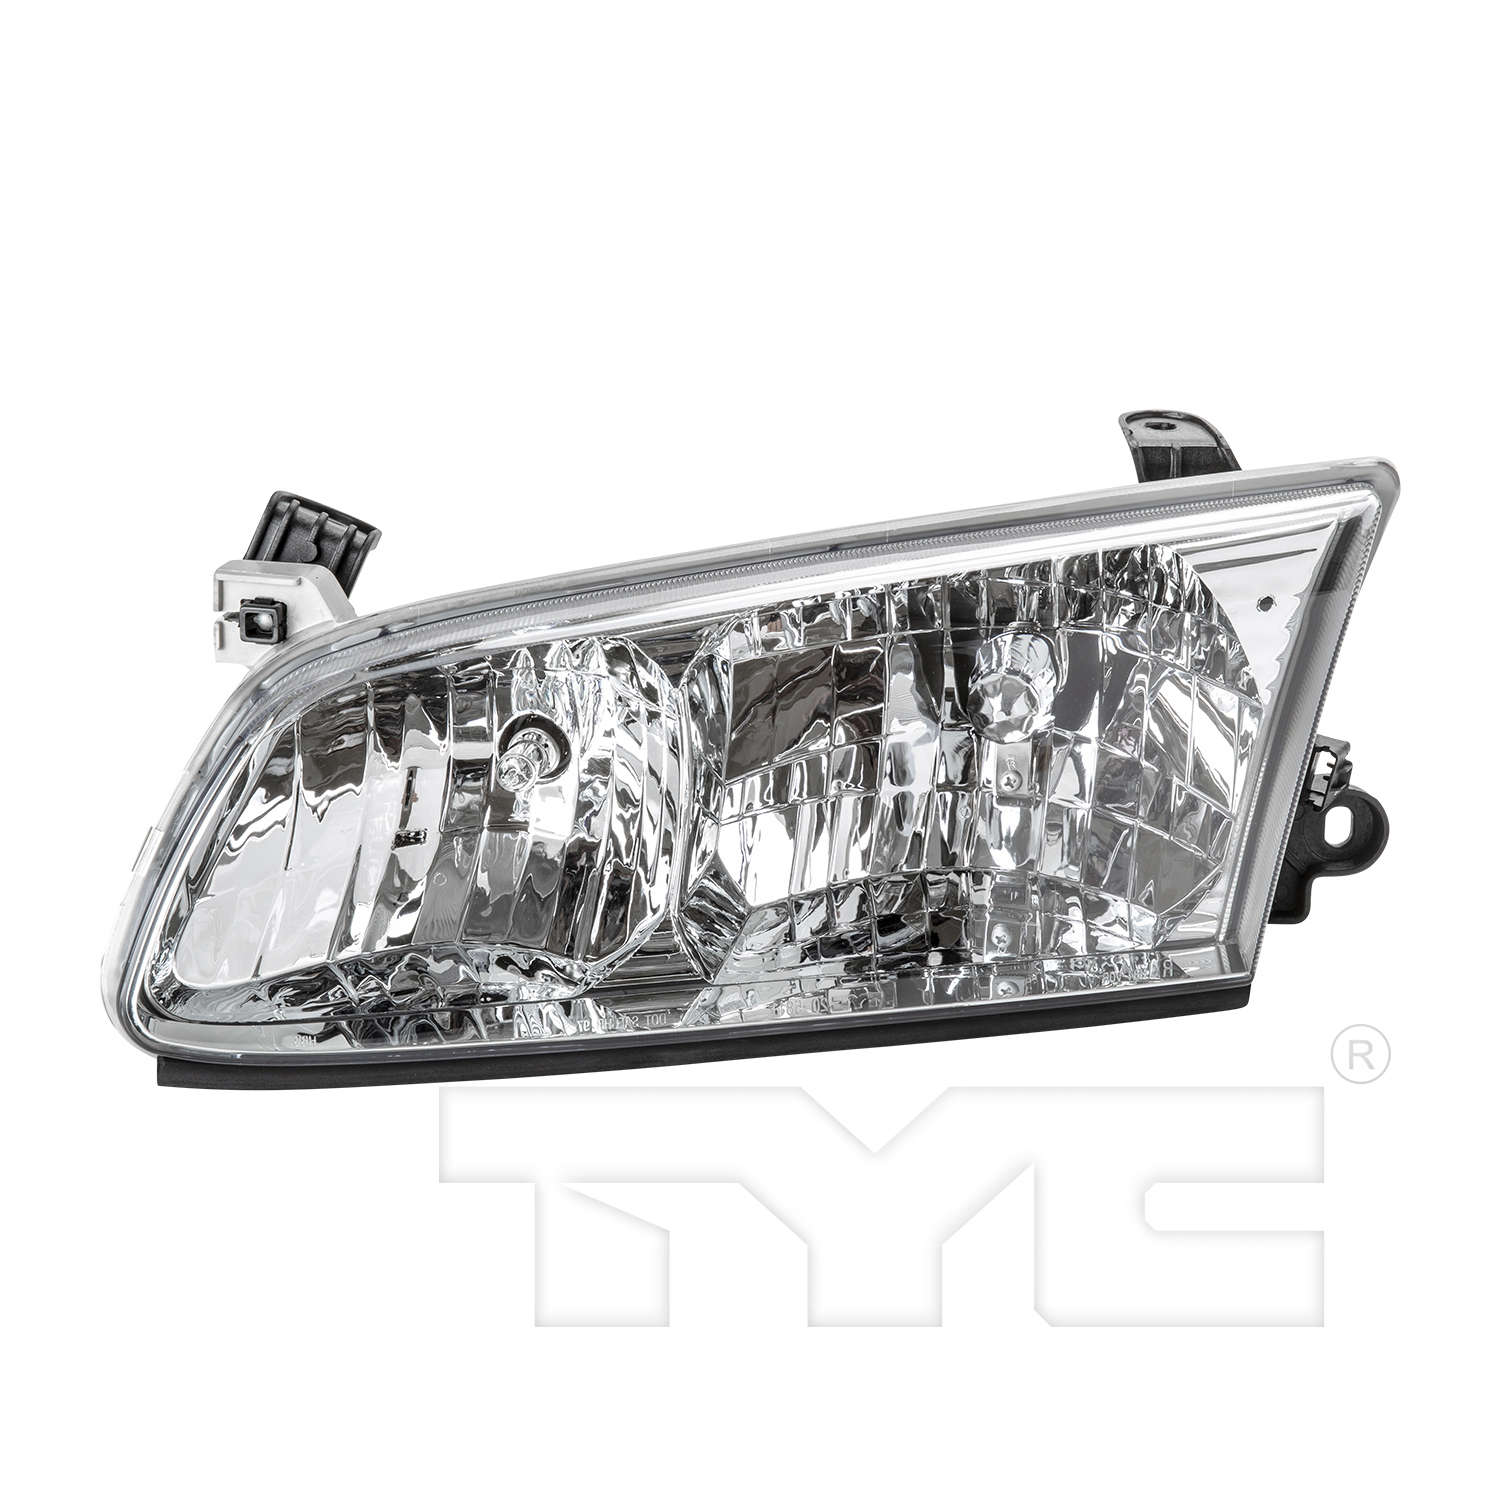 Aftermarket HEADLIGHTS for TOYOTA - CAMRY, CAMRY,00-01,LT Headlamp assy composite